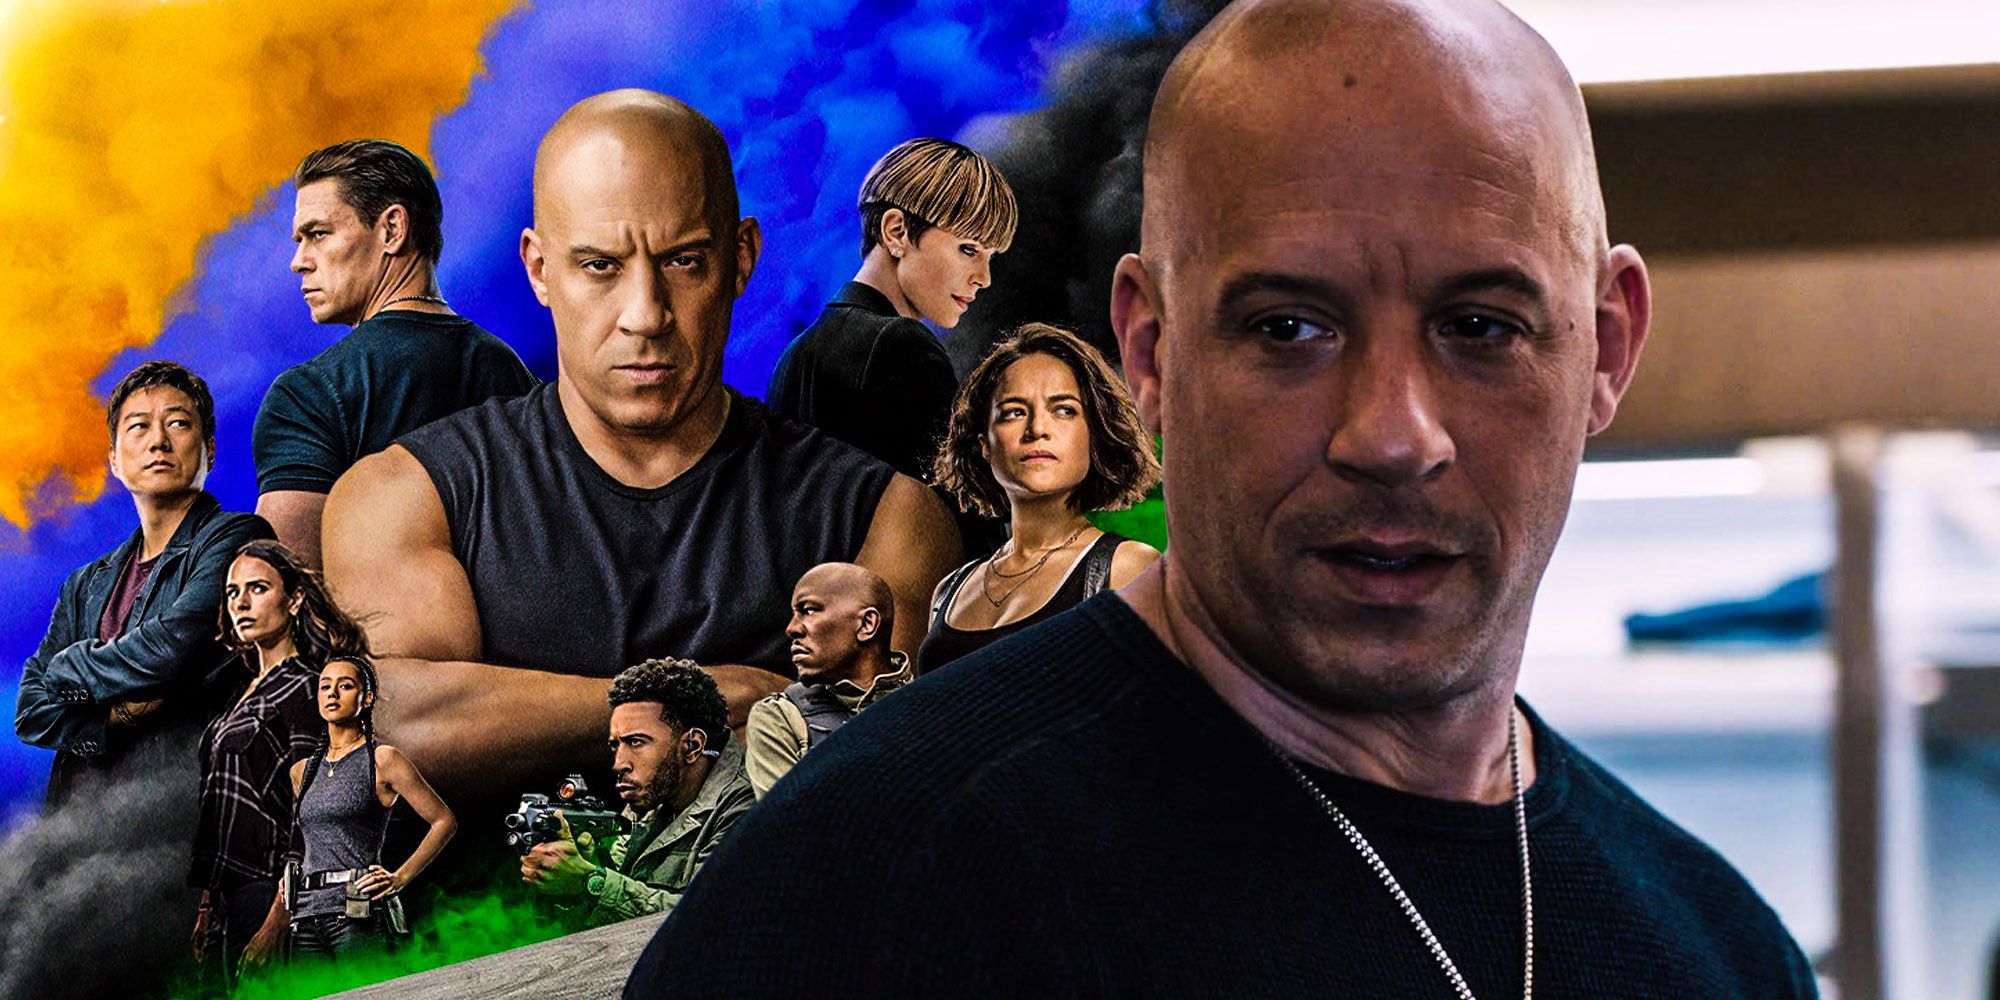 Vin Diesel Fast and furious 9 box office rebound theatrical problems